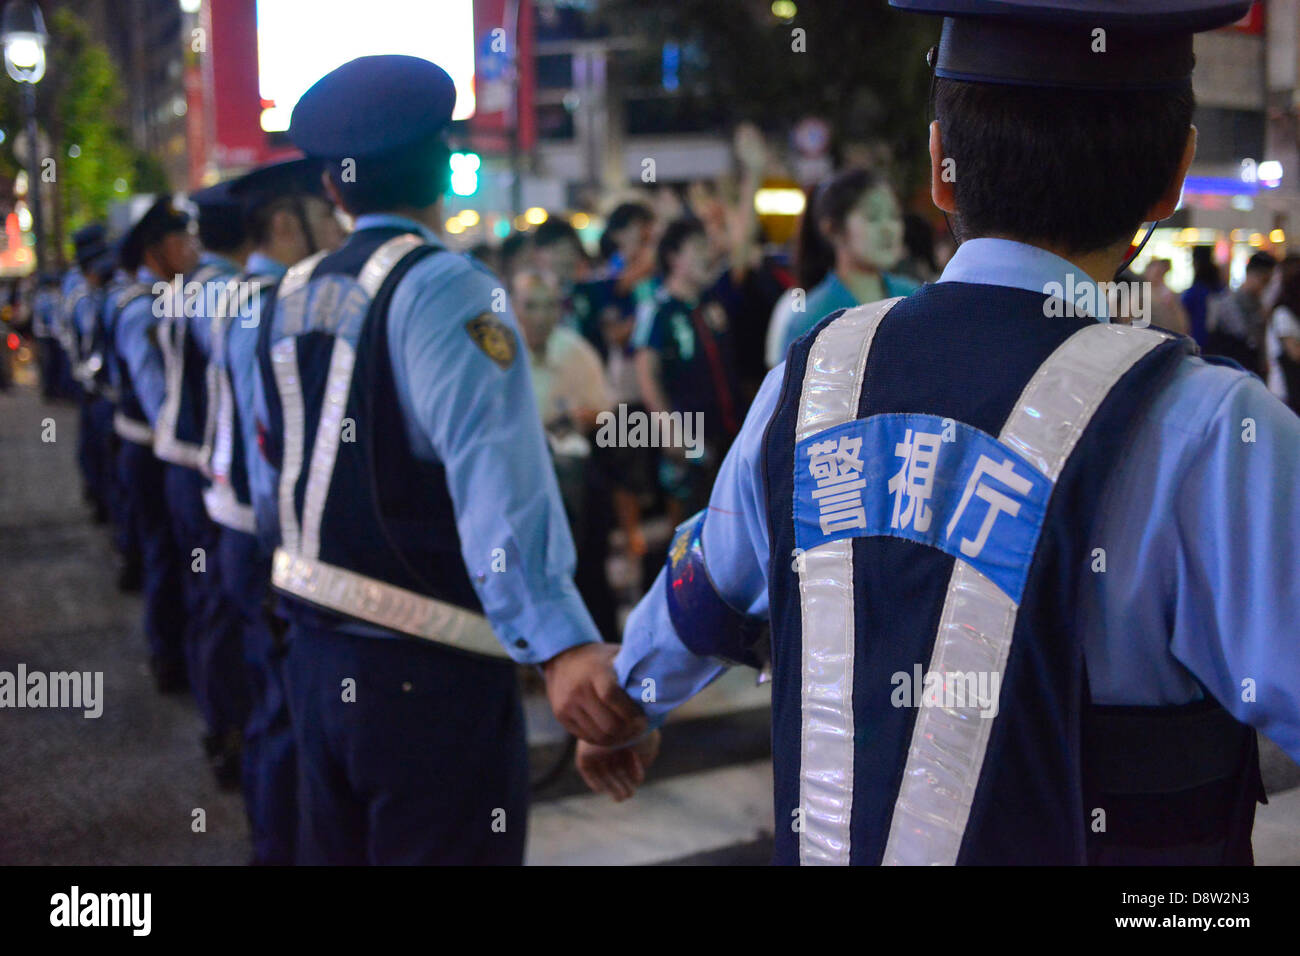 Saitama, Japan. 4th June 2013. June 4th, 2013 : Tokyo, Japan - Police Officers restricted pedestrians and celebrating fans of the Japan National Soccer team, which had a game of the final Asian qualifiers for the 2014 World Cup against Australia and cleared it, in front of Shibuya Station, Shibuya, Tokyo Japan on June 4, 2013.  (Photo by Koichiro Suzuki/AFLO/Alamy Live News) Stock Photo